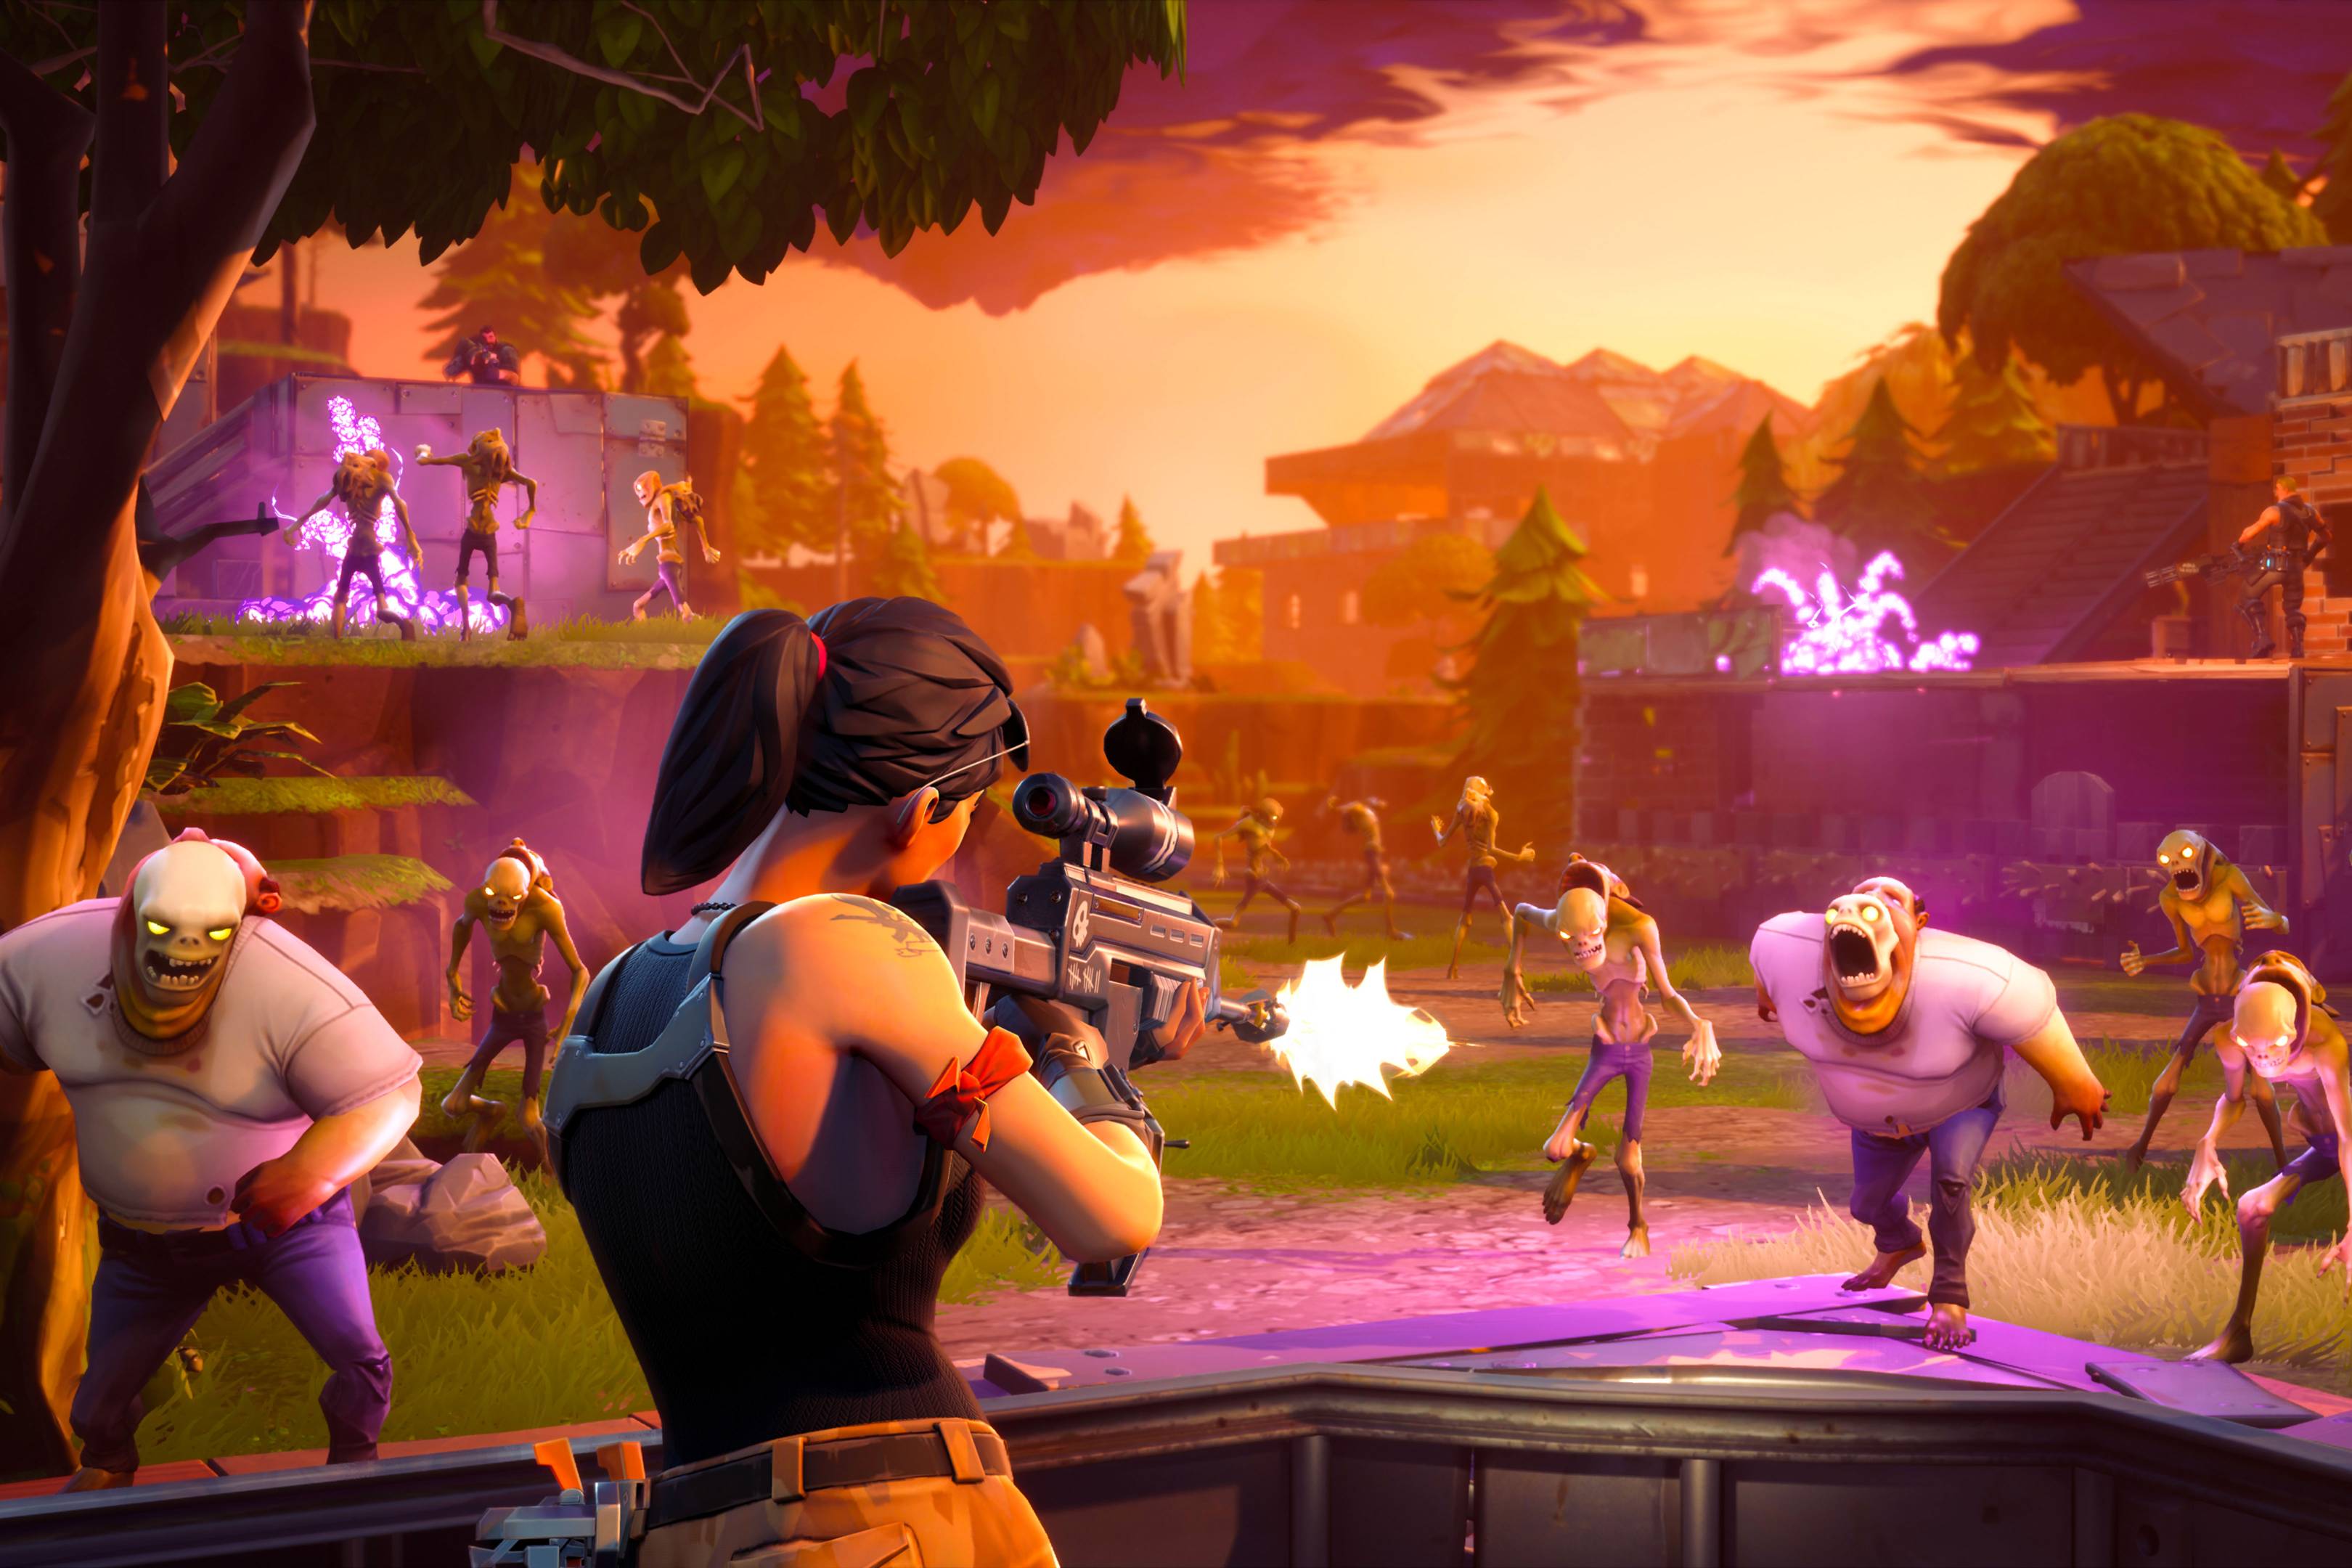 Fortnite Shunning The Android Play Store Is A Major Security - fortnite shunning the android play store is a major security headache wired uk